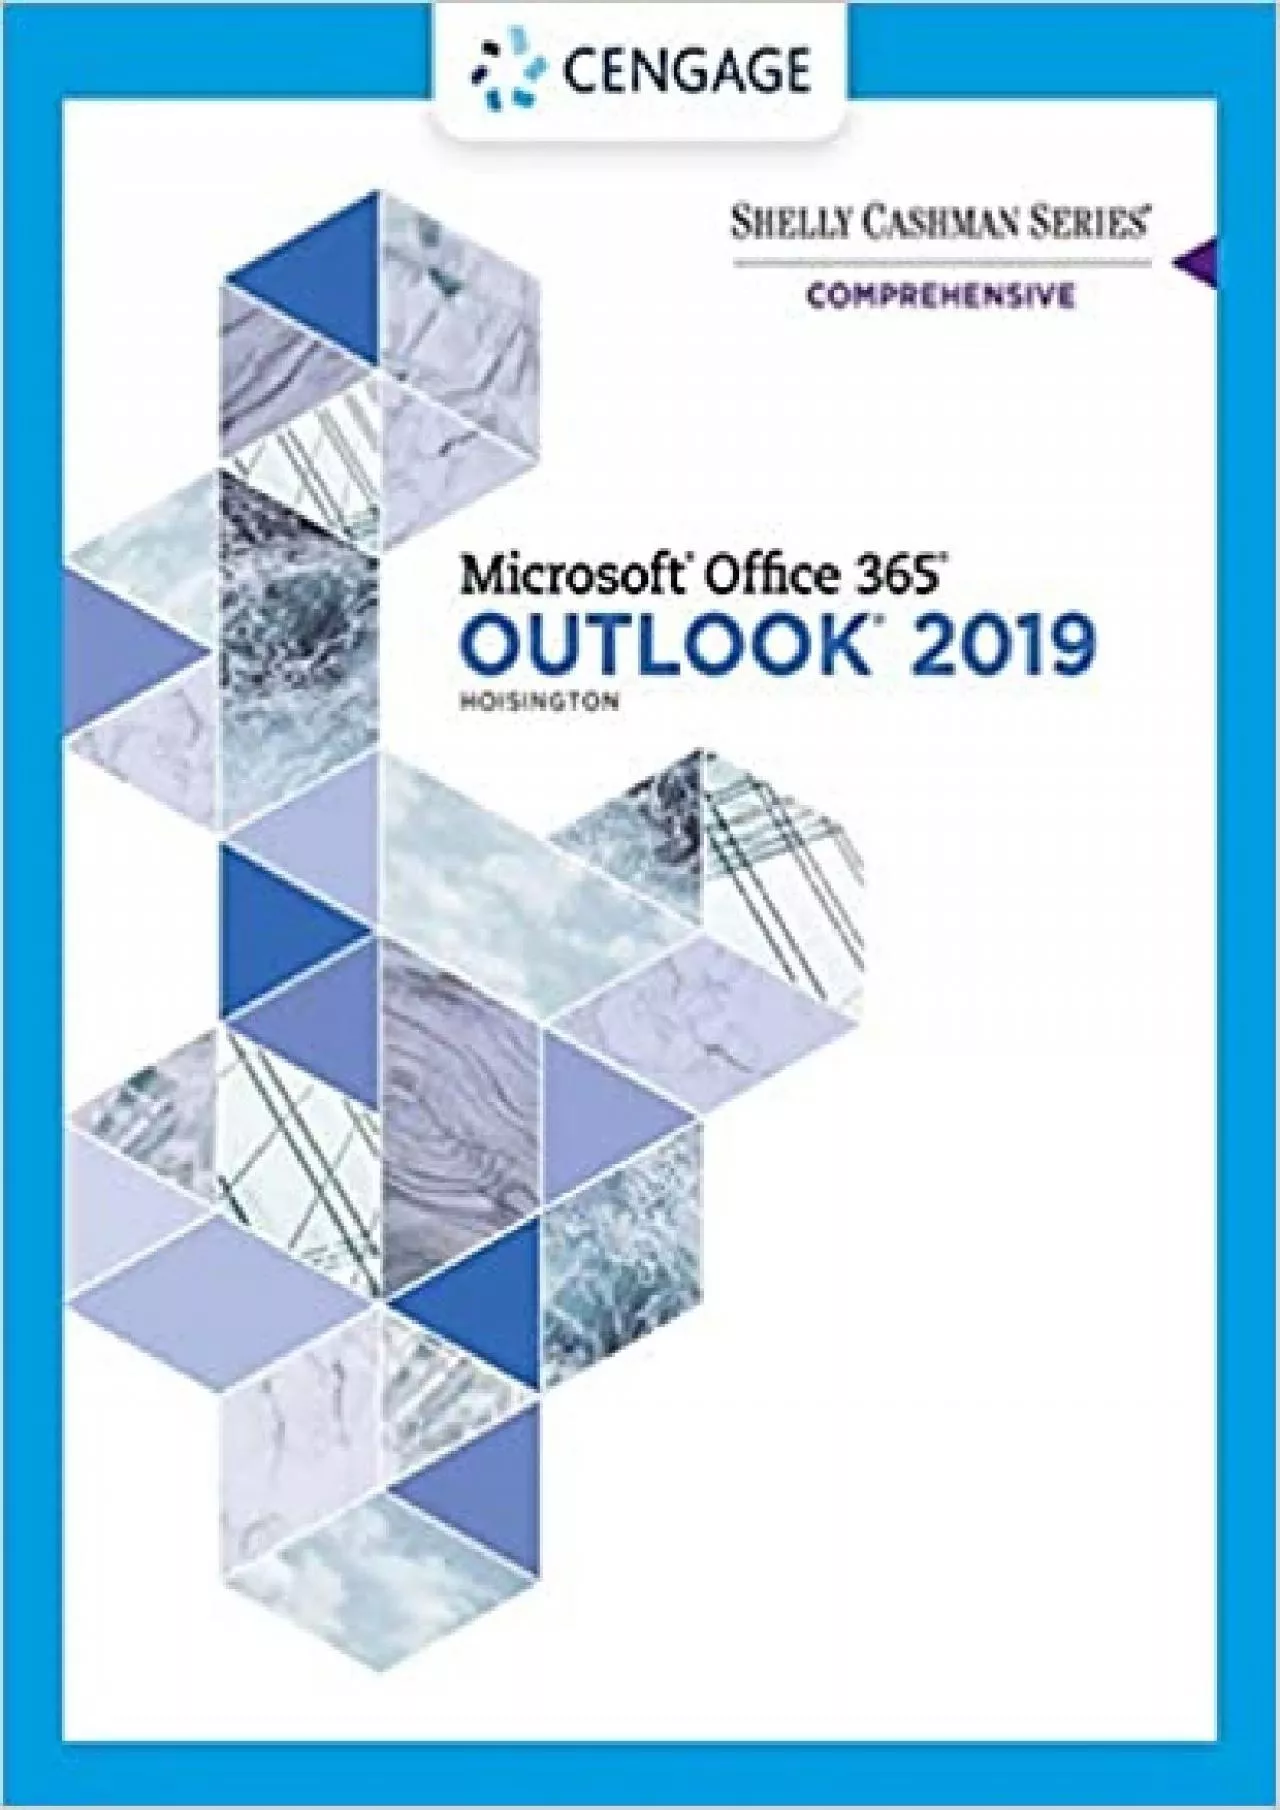 Shelly Cashman Series Microsoft Office 365 & Outlook 2019 Comprehensive (MindTap Course